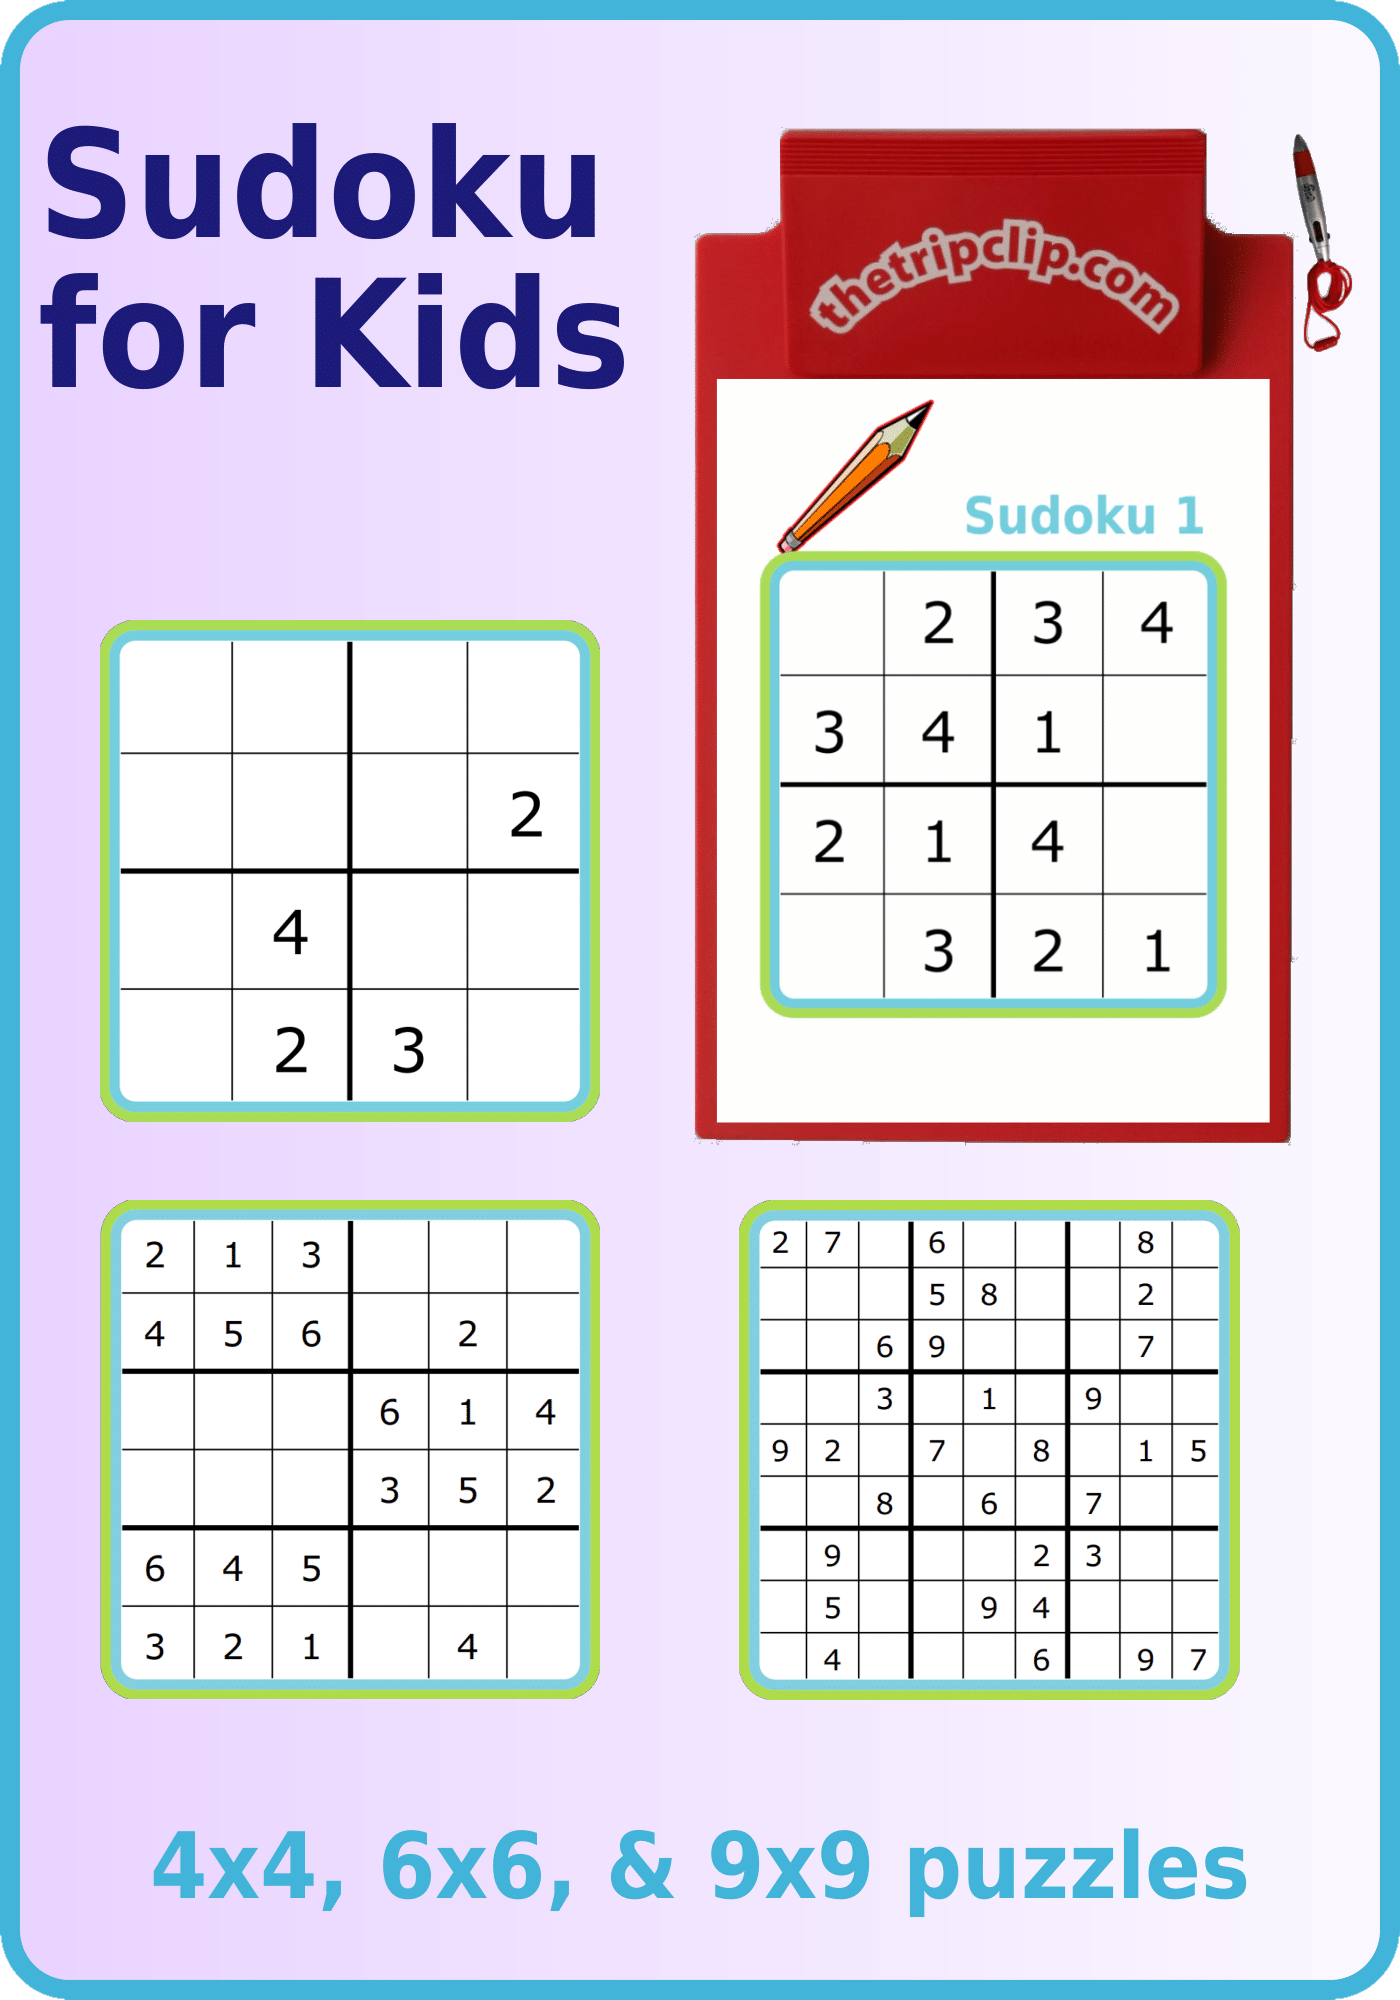 Four sudoku puzzles, 4x4, 6x6, 9x9, one on a kid-sized clipboards